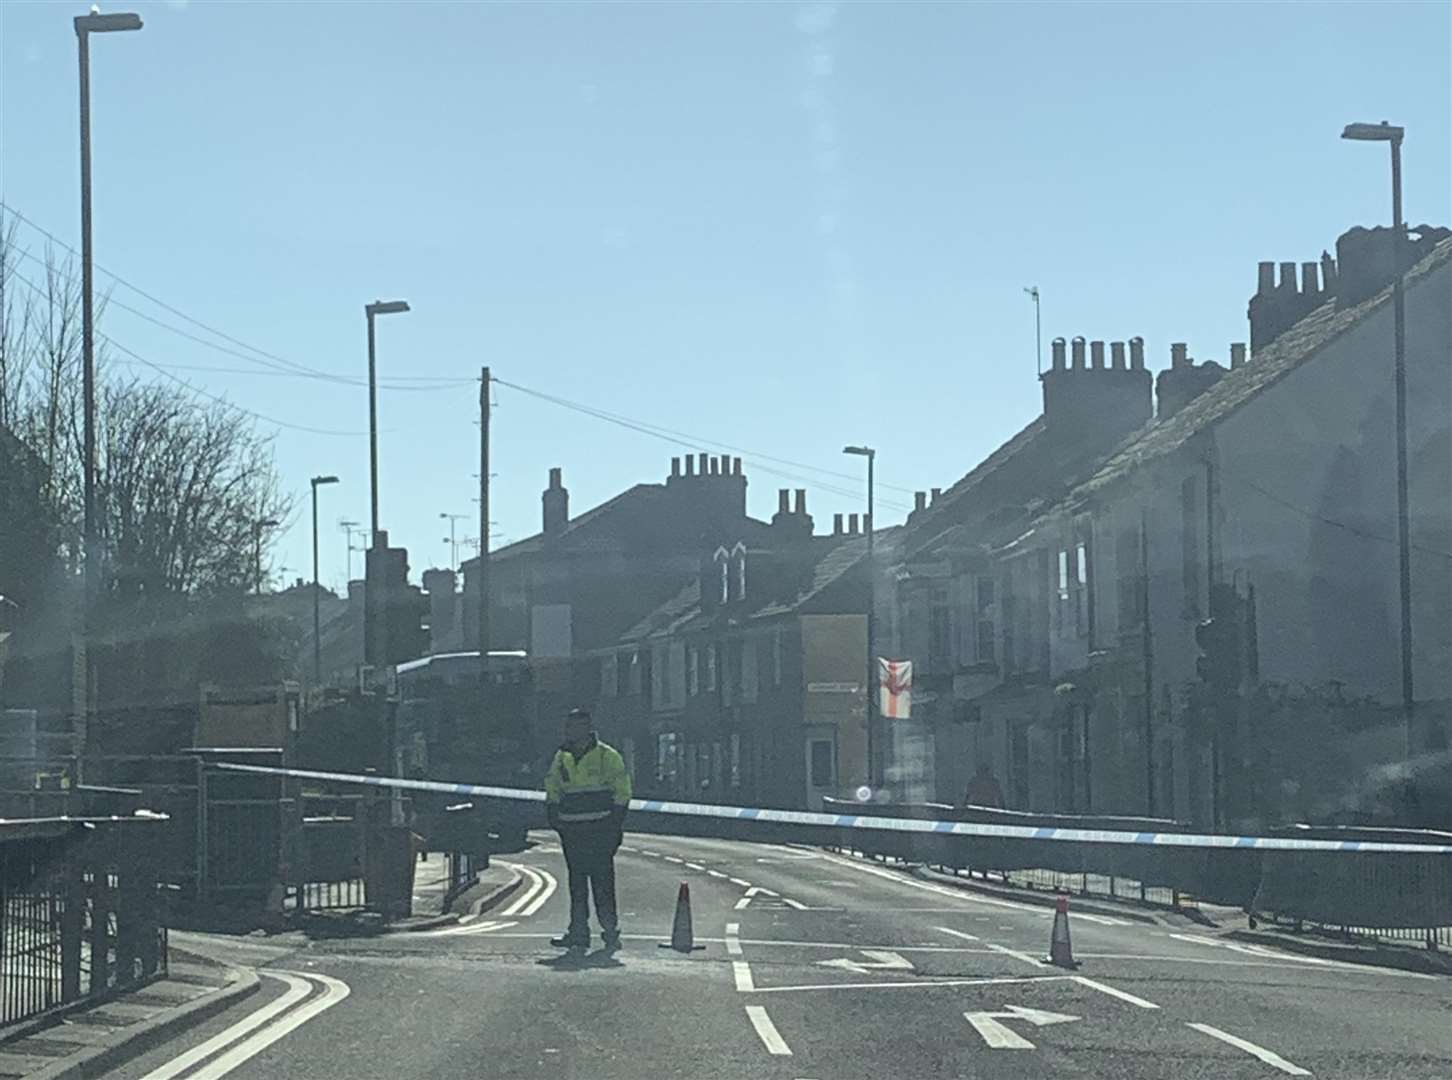 Police officers are investigating after a woman was found injured in Luton Road, Chatham.